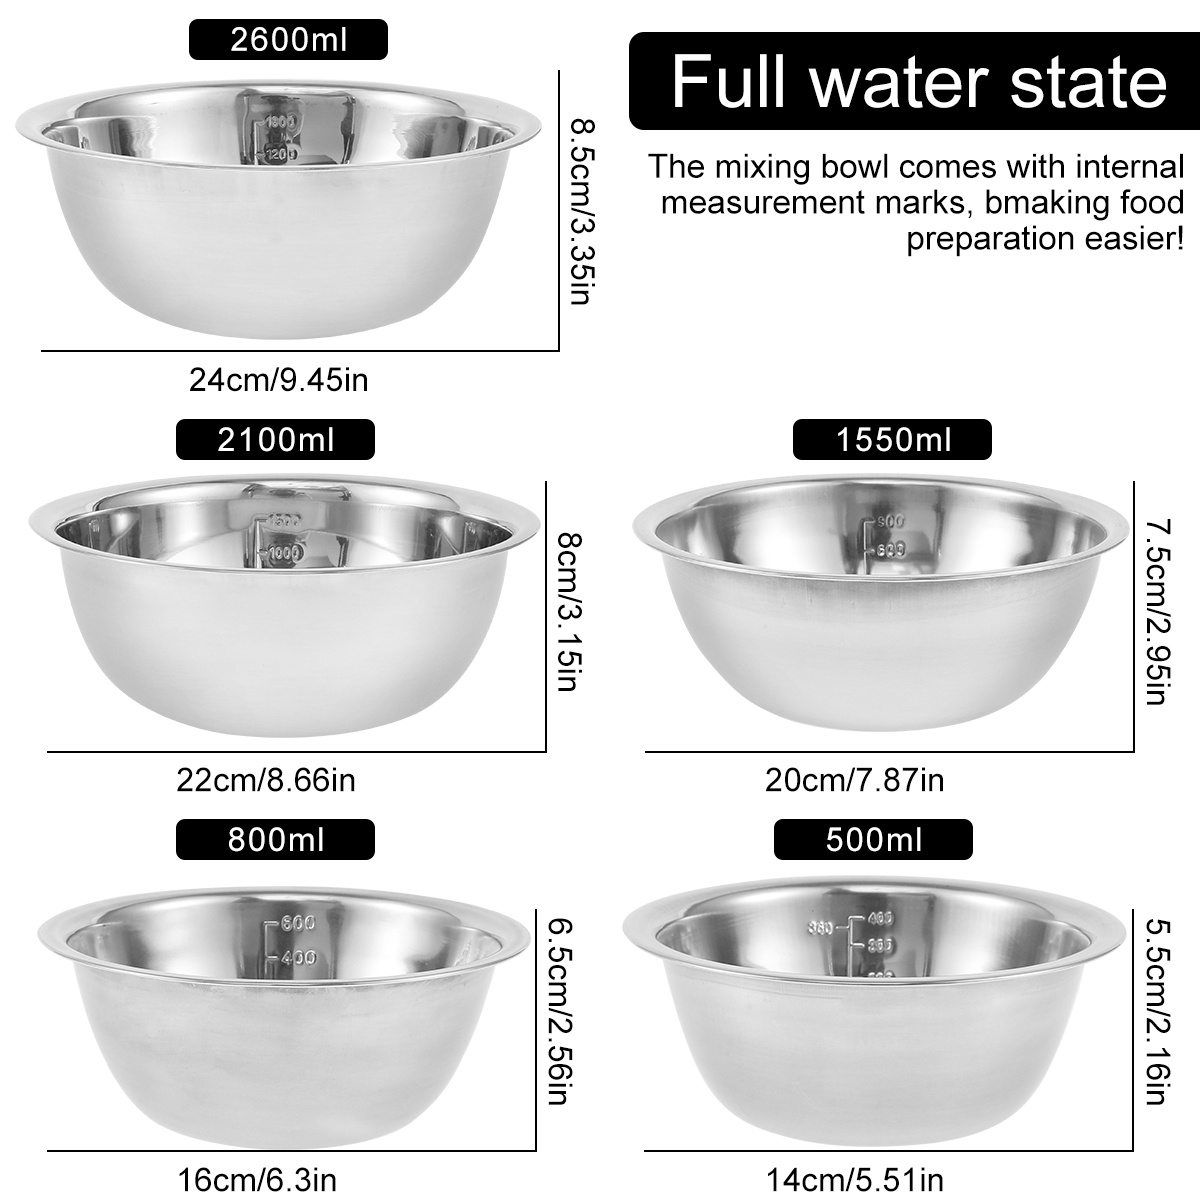 BOWLZ Stainless Steel Insulated Bowl 16 oz, Ice Cream, Soup, White (New)